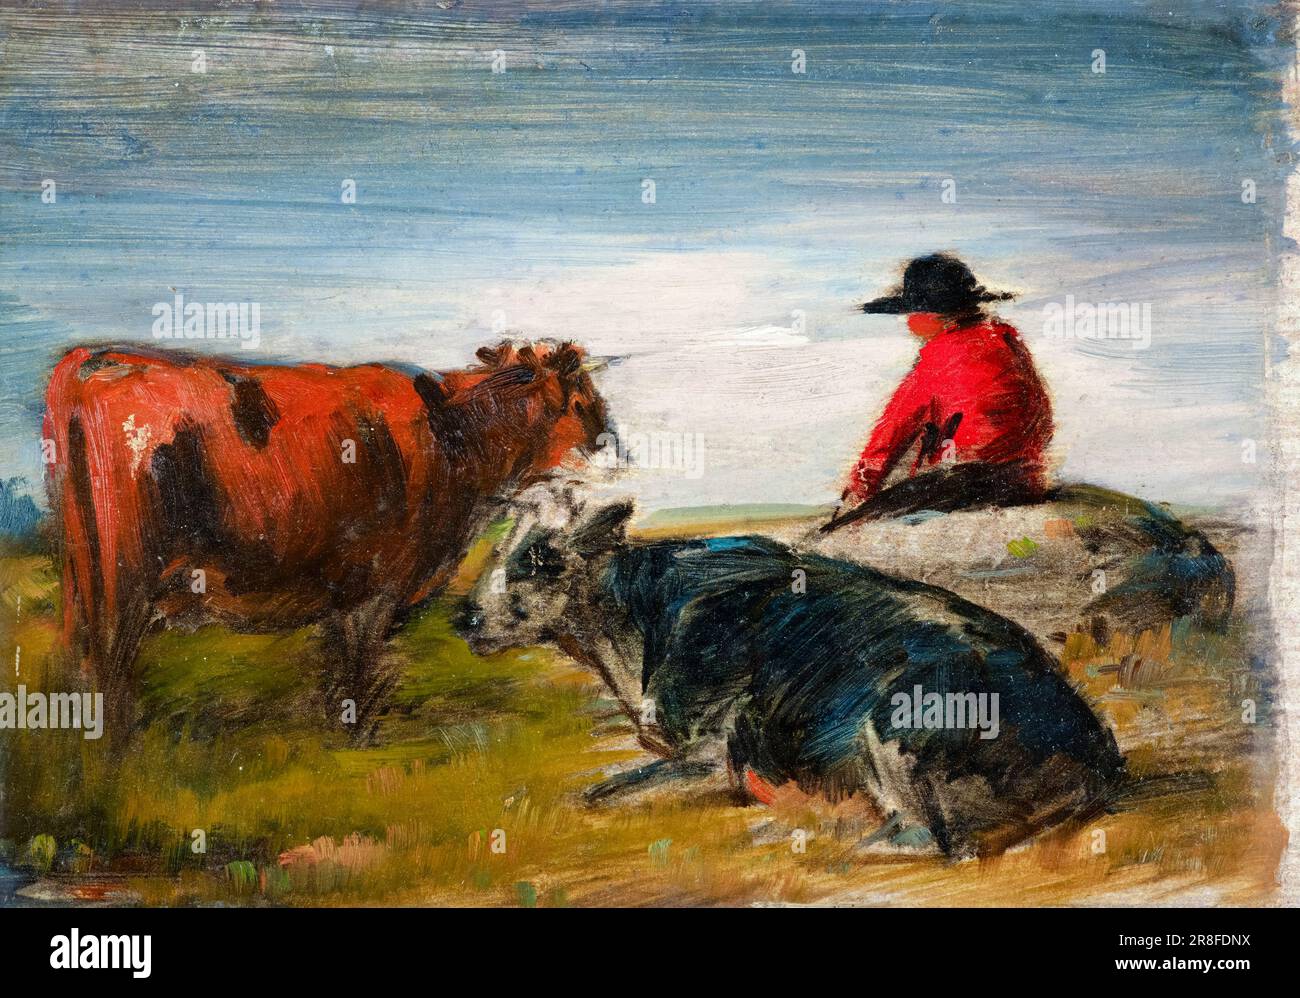 Wilhelm Busch, Shepherd with cows, painting in oil on cardboard, circa 1885 Stock Photo